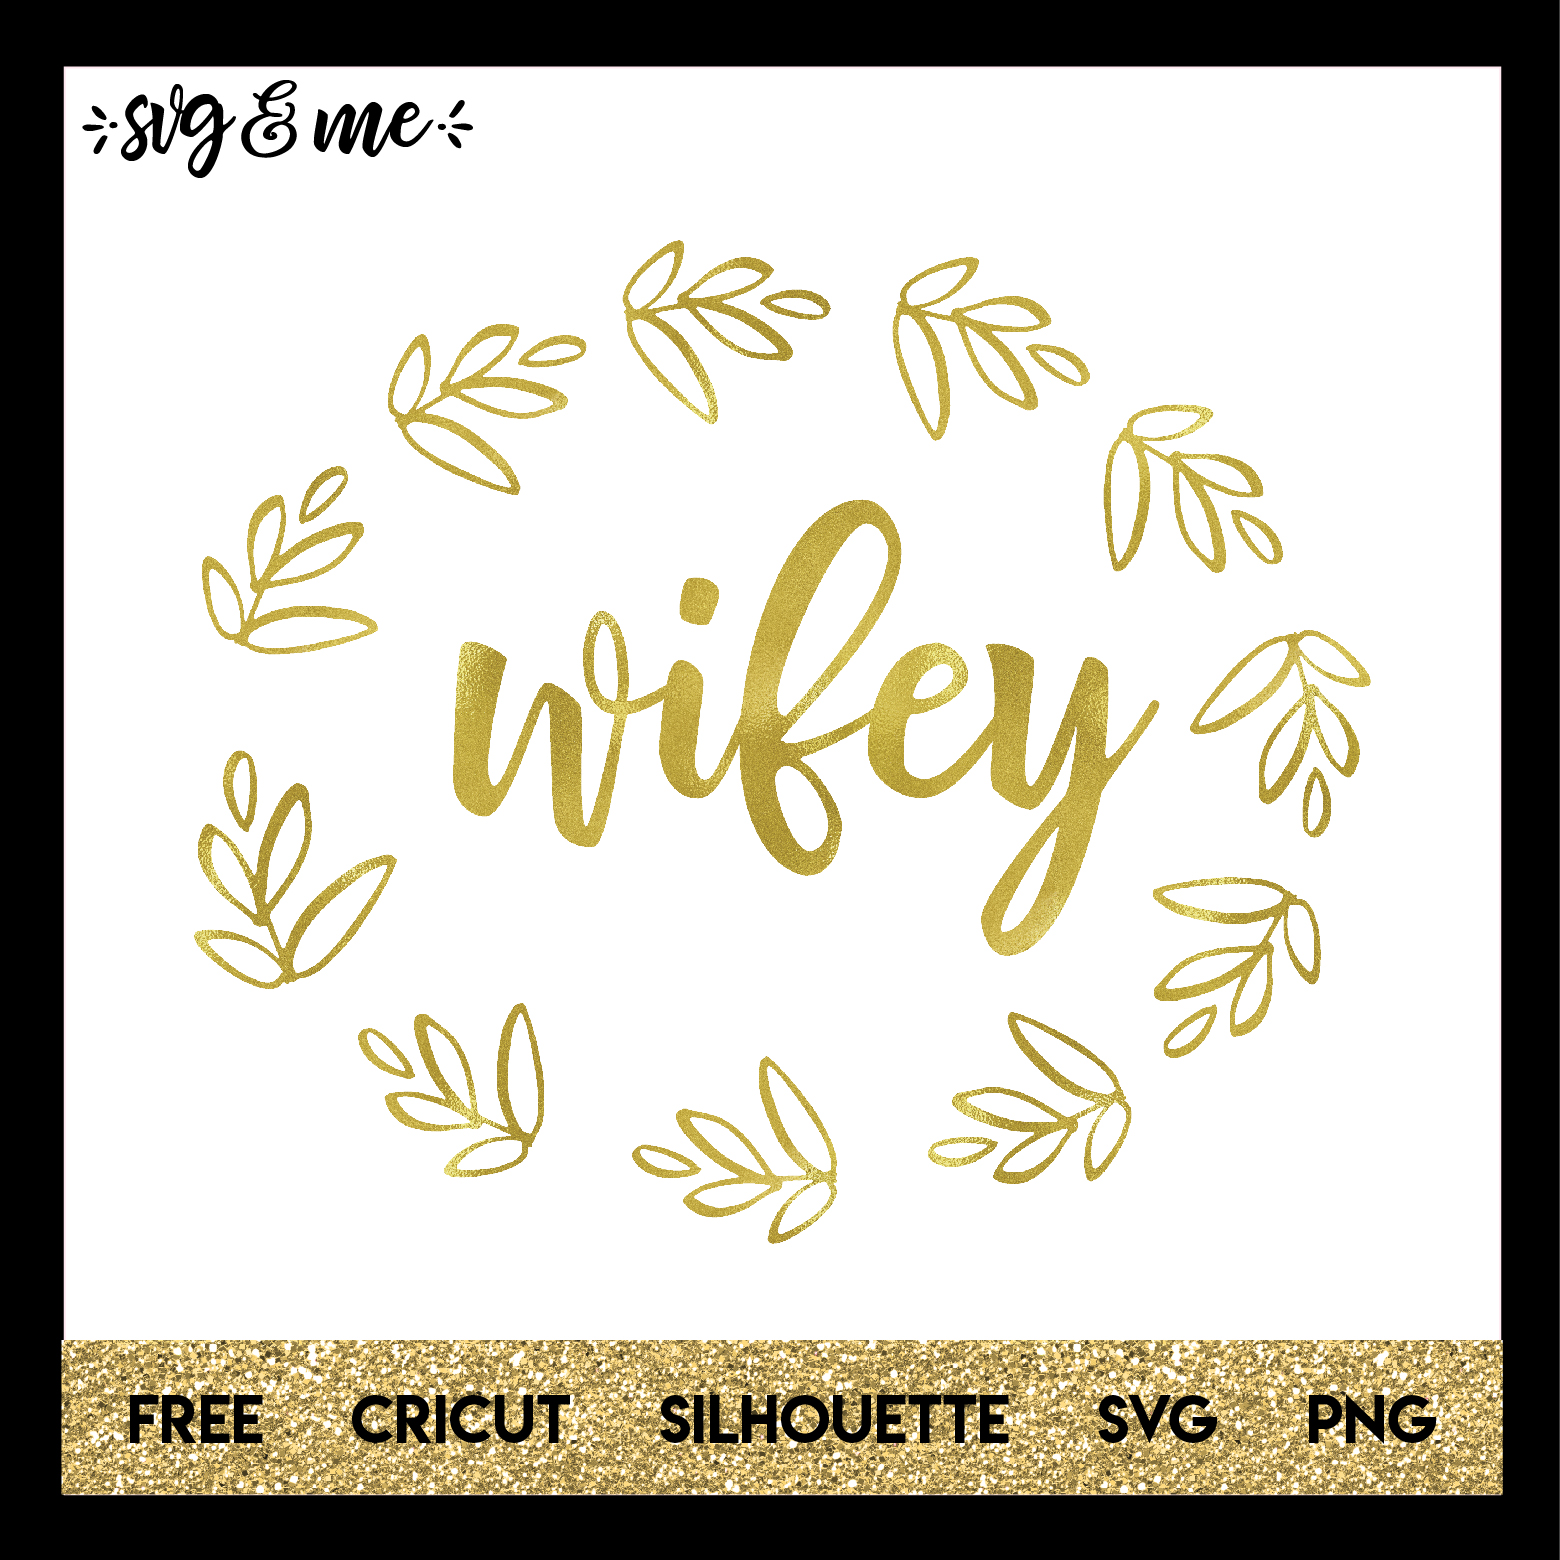 Download Free Svg Cut File For Cricut Silhouette And More Wifey Gold Wreath Wedding Svg Svg Me